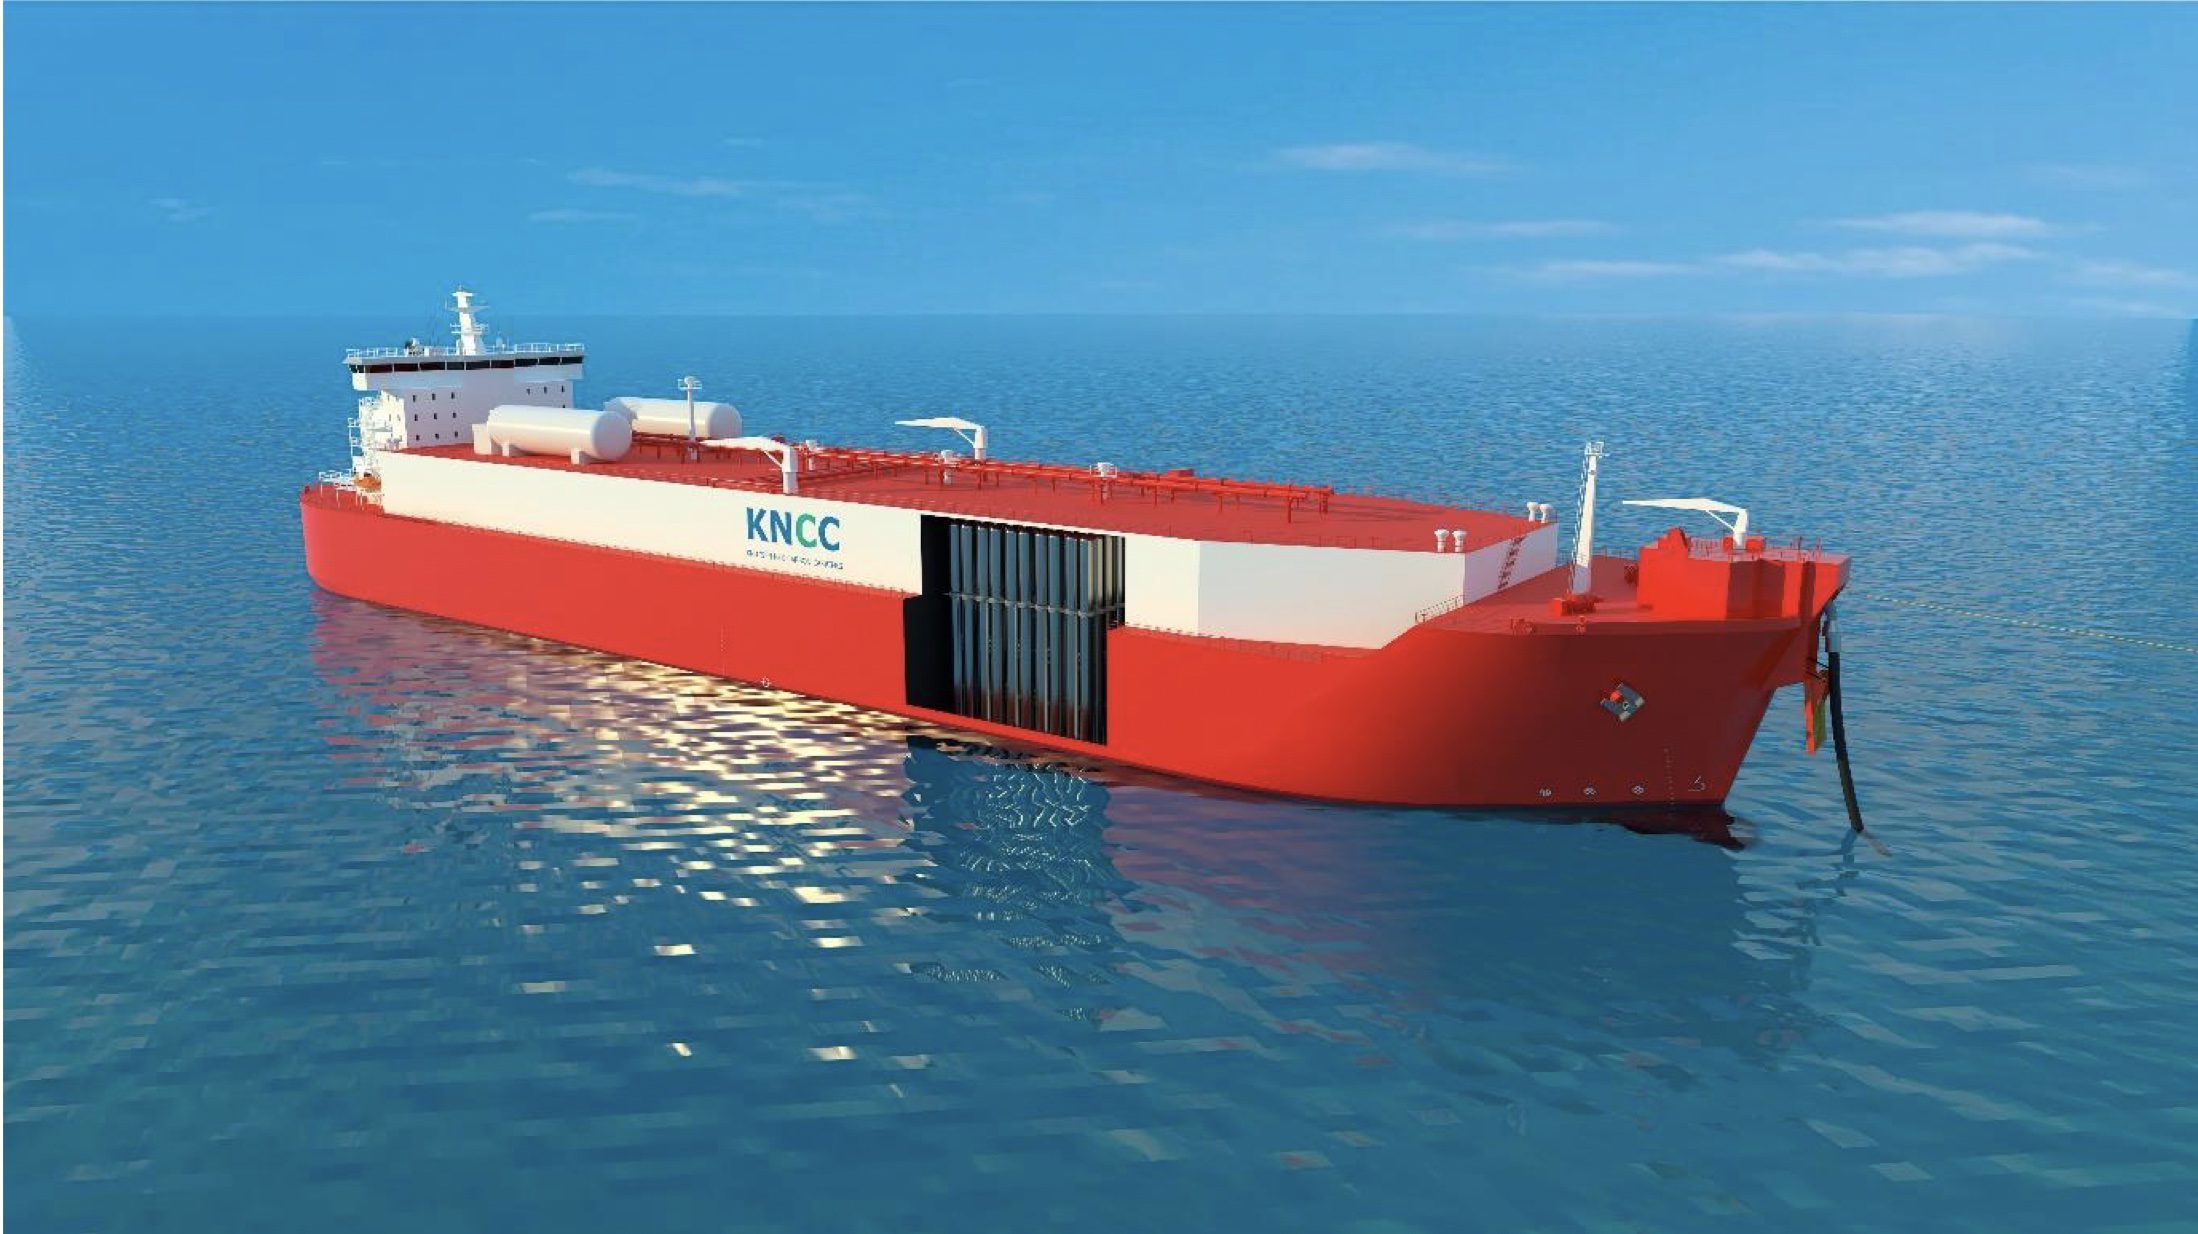 Knutsen NYK Carbon Carrier Tapped for Western Australia Carbon Capture and Storage Project